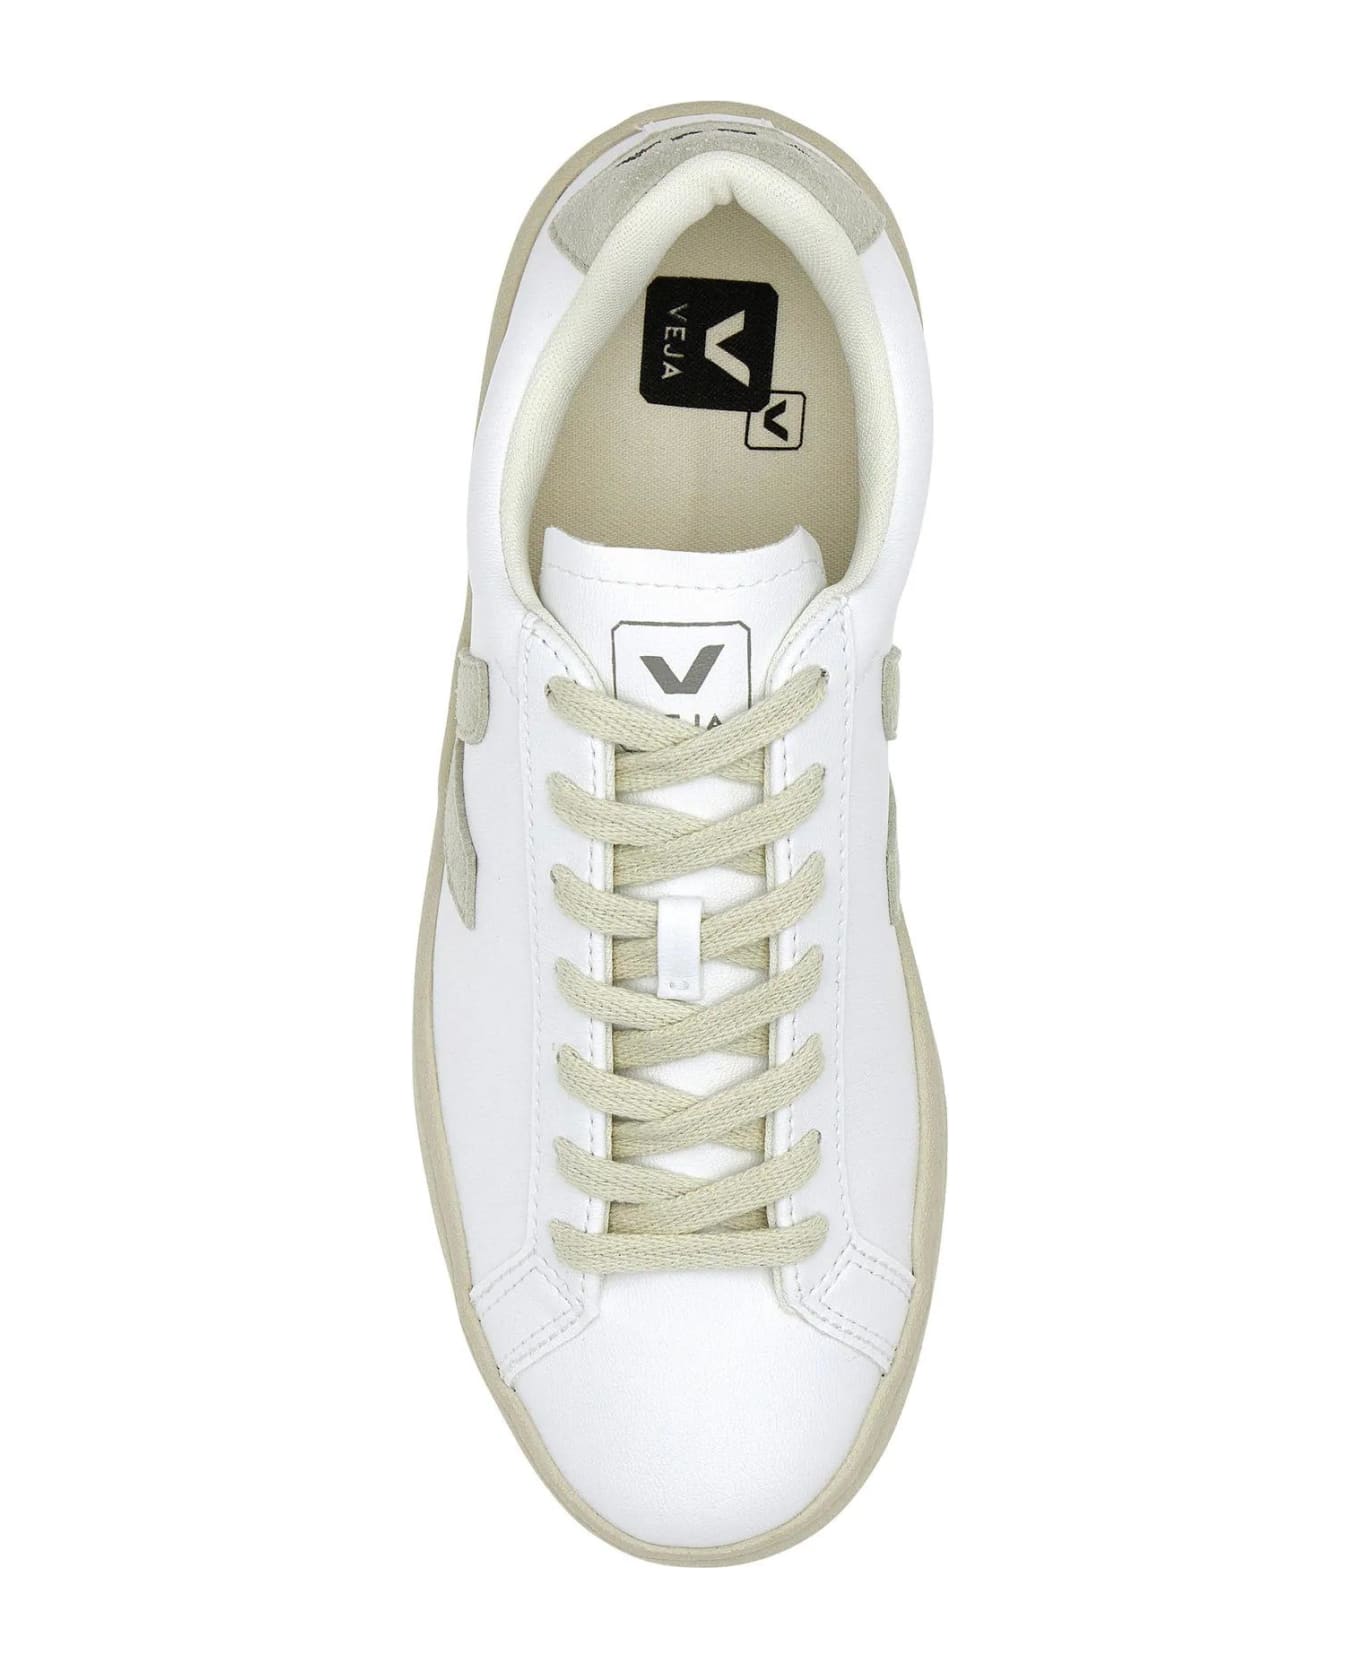 Veja White Synthetic Leather Urca Sneakers - Bianco